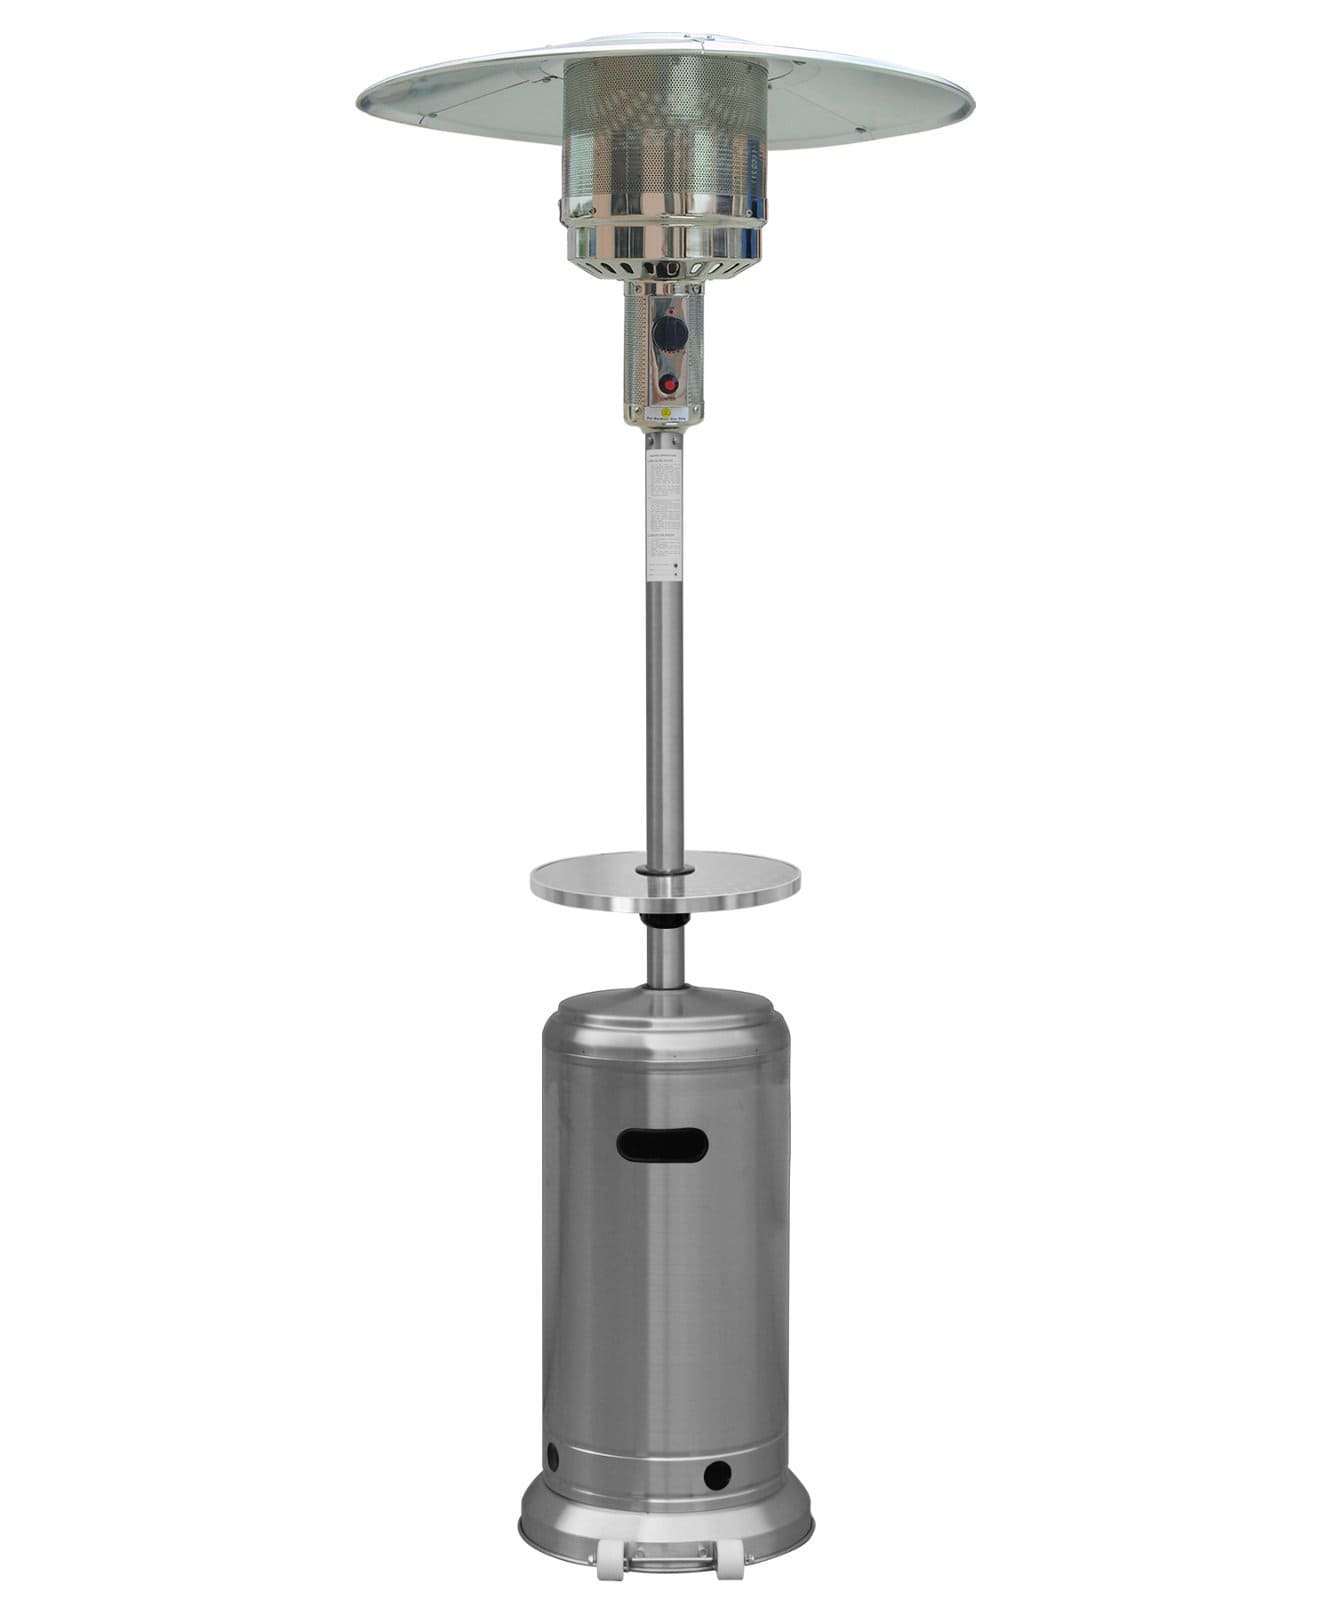 Hiland Patio Heaters Parasol Patio Heaters Hiland Patio Heaters Outdoor Patio Heater with Wheel in Stainless Steel